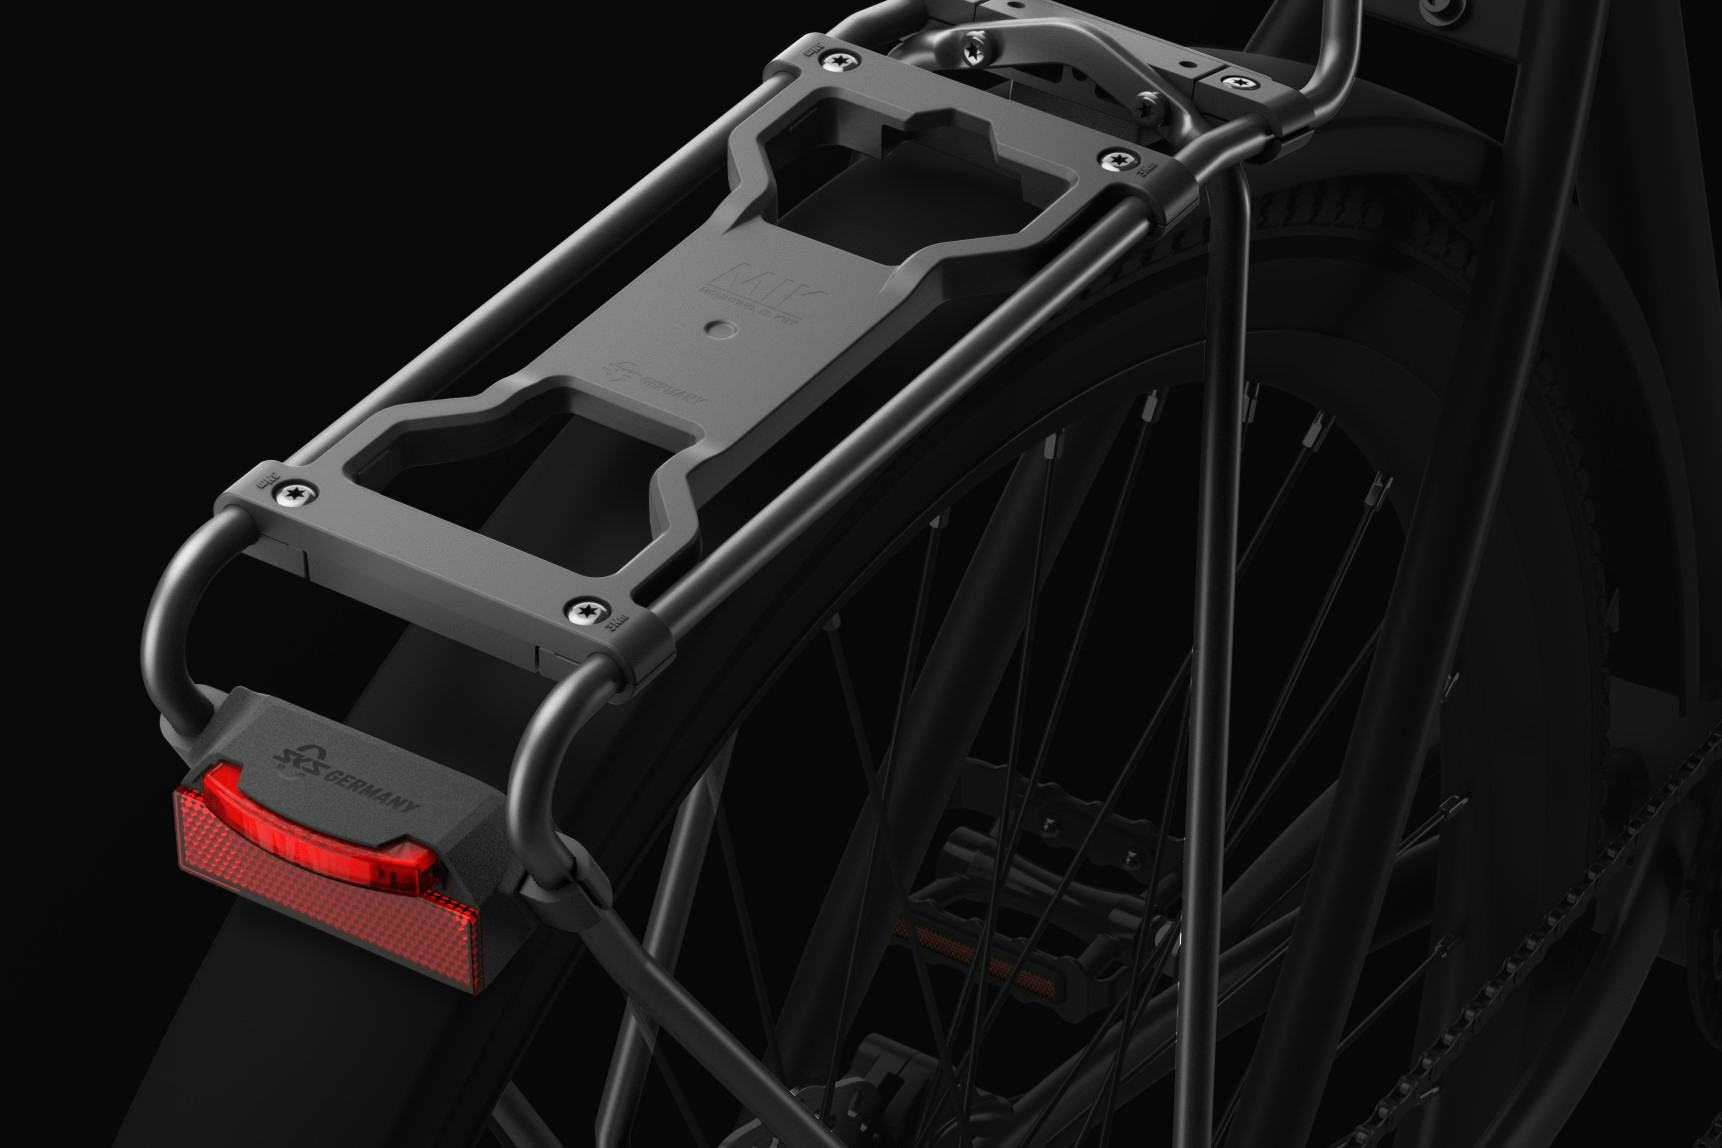 The integrated Spanninga rear light is a key feature of SKS Germany’s new Infinity luggage carrier. – Photo Spanninga